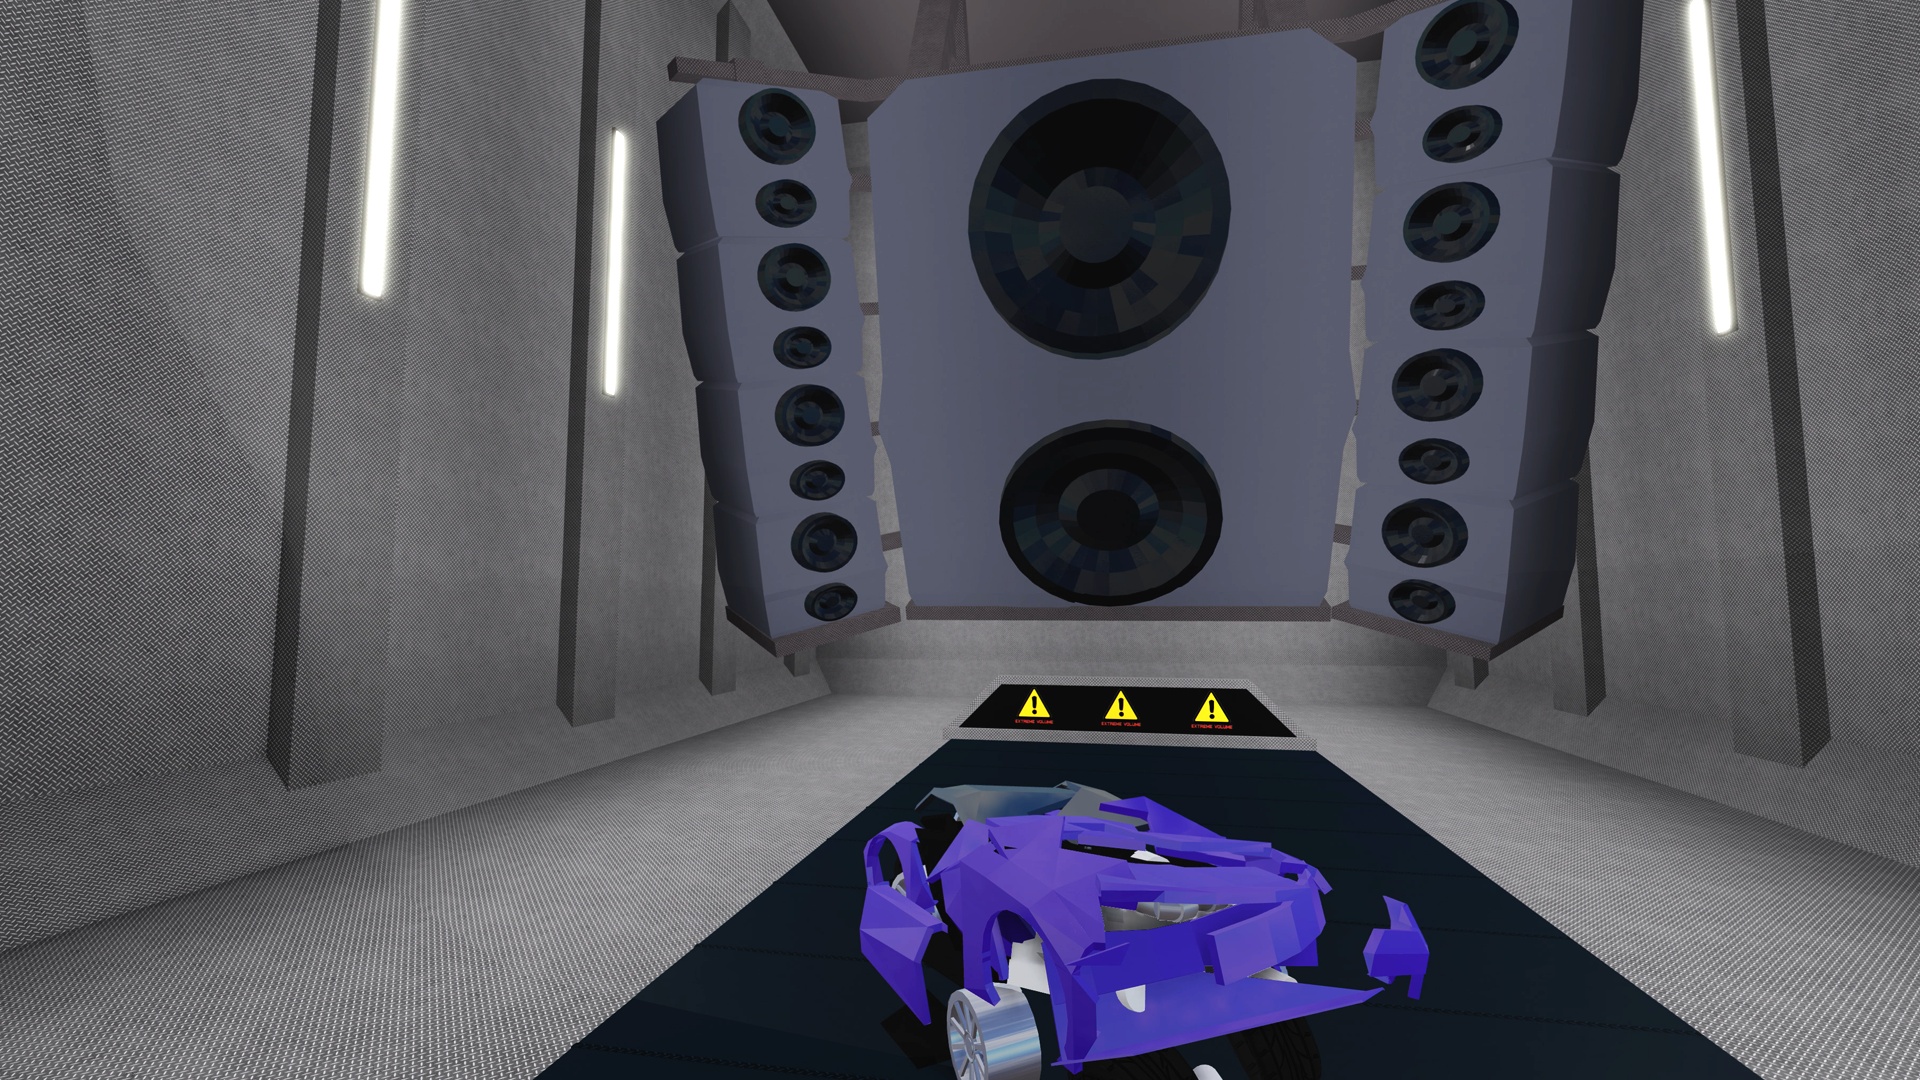 Wreck Your Friends In Car Crushers 2 Now Available On Roblox For